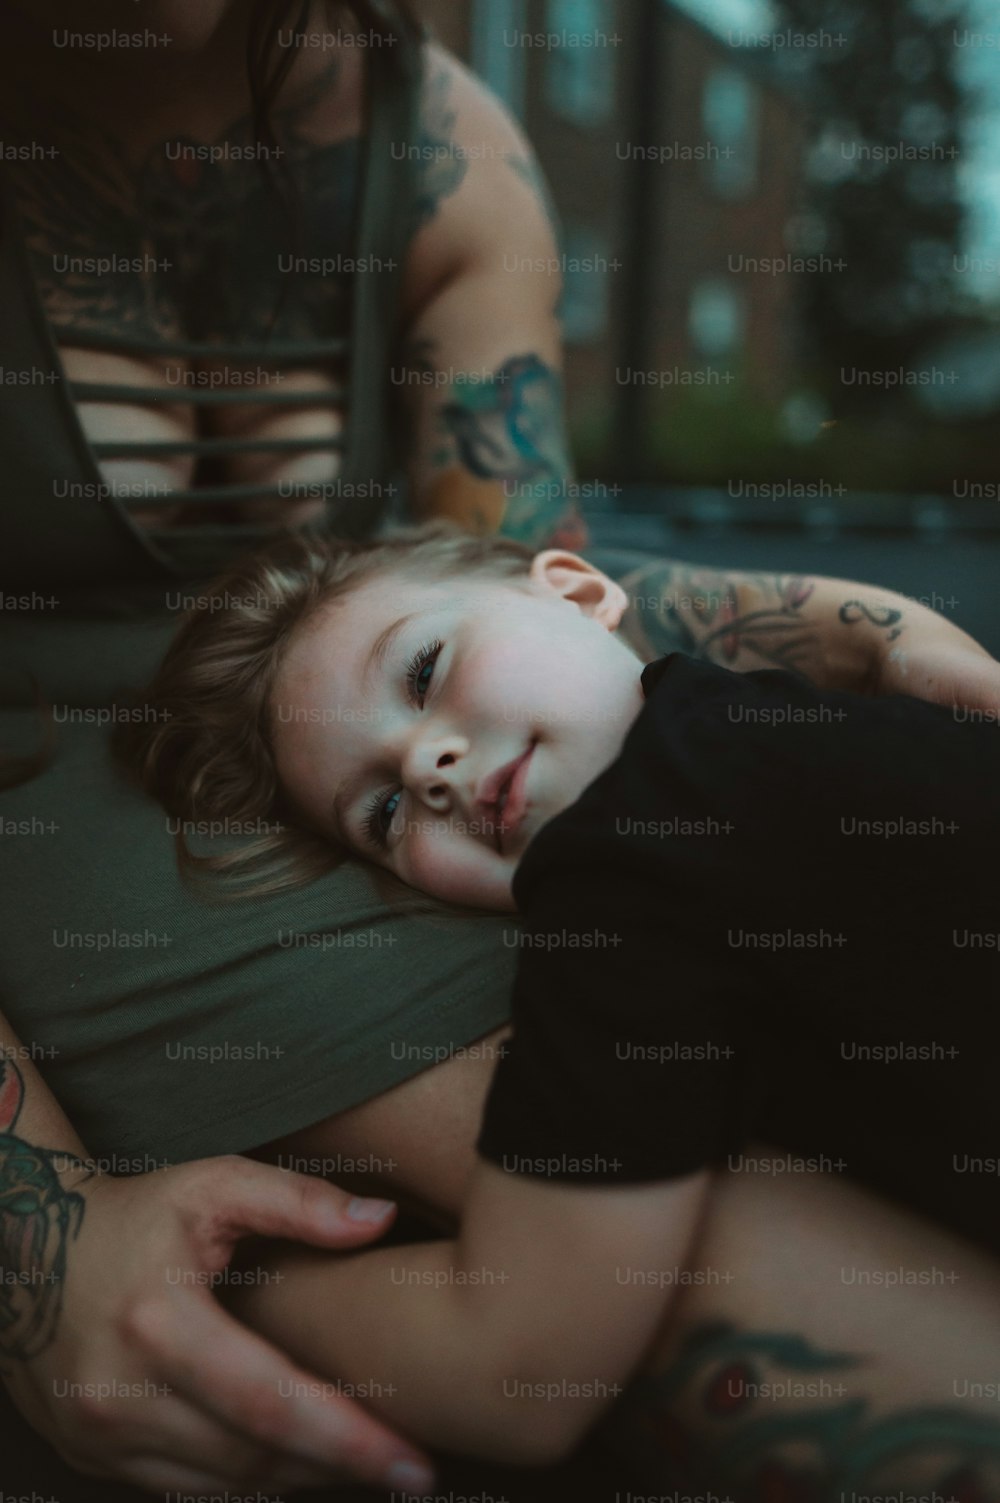 a woman holding a child with tattoos on her arms